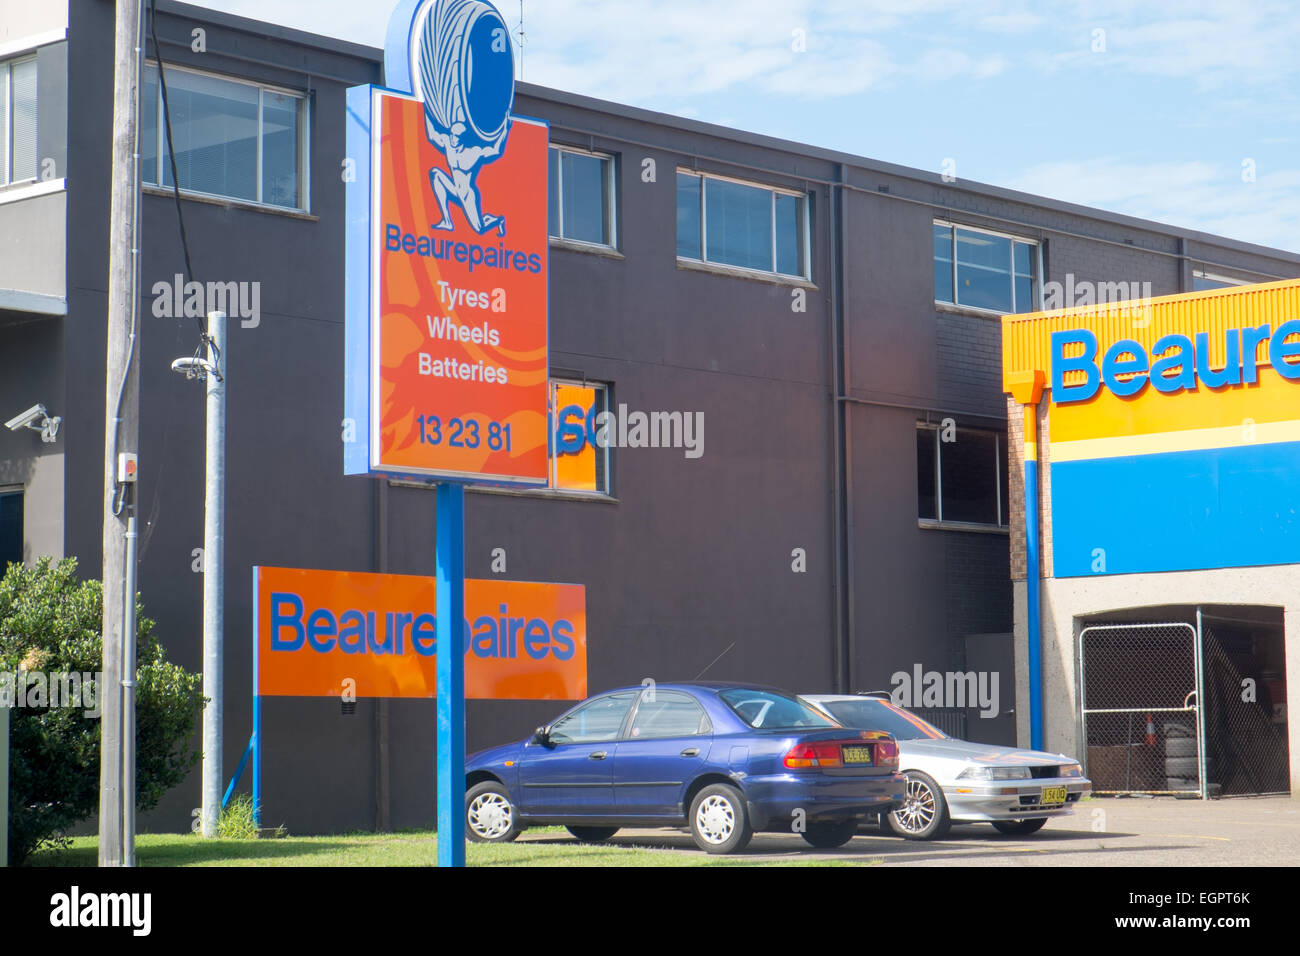 Beaurepaires is an australian and new zealand chain of trye repair and garage depots,here in brookvale sydney australia Stock Photo